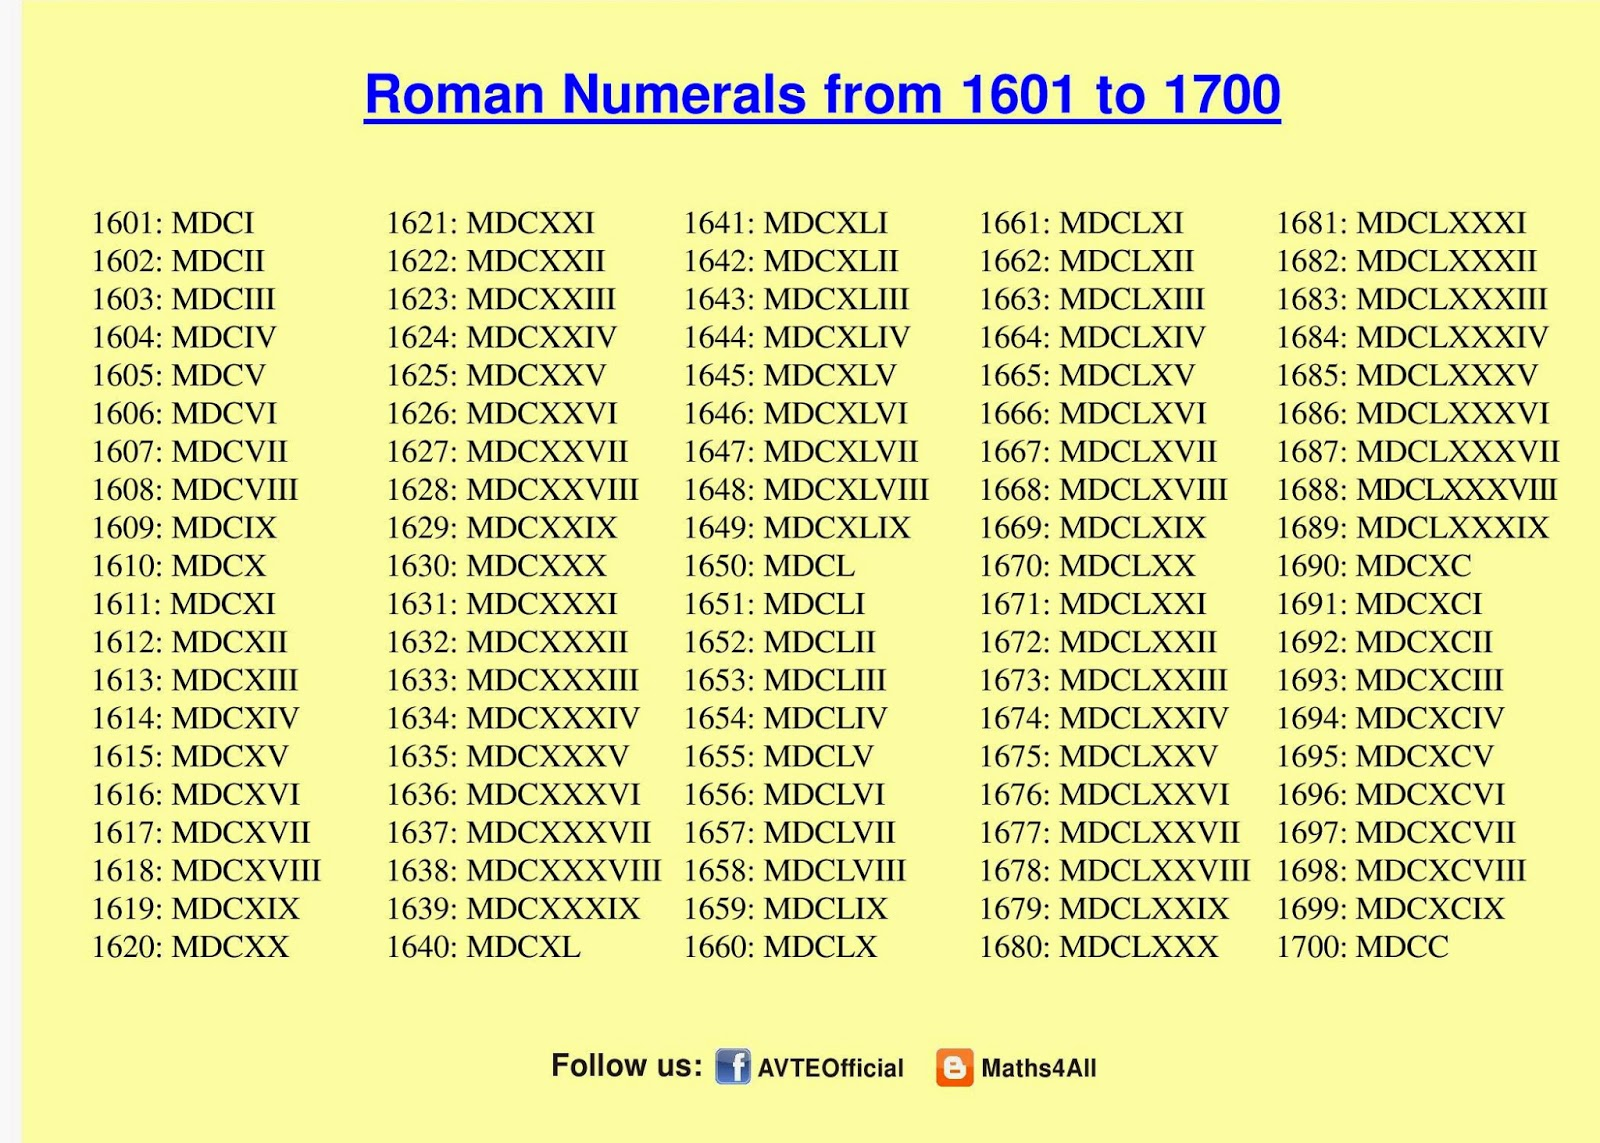 Maths4all ROMAN NUMERALS 1601 TO 1700